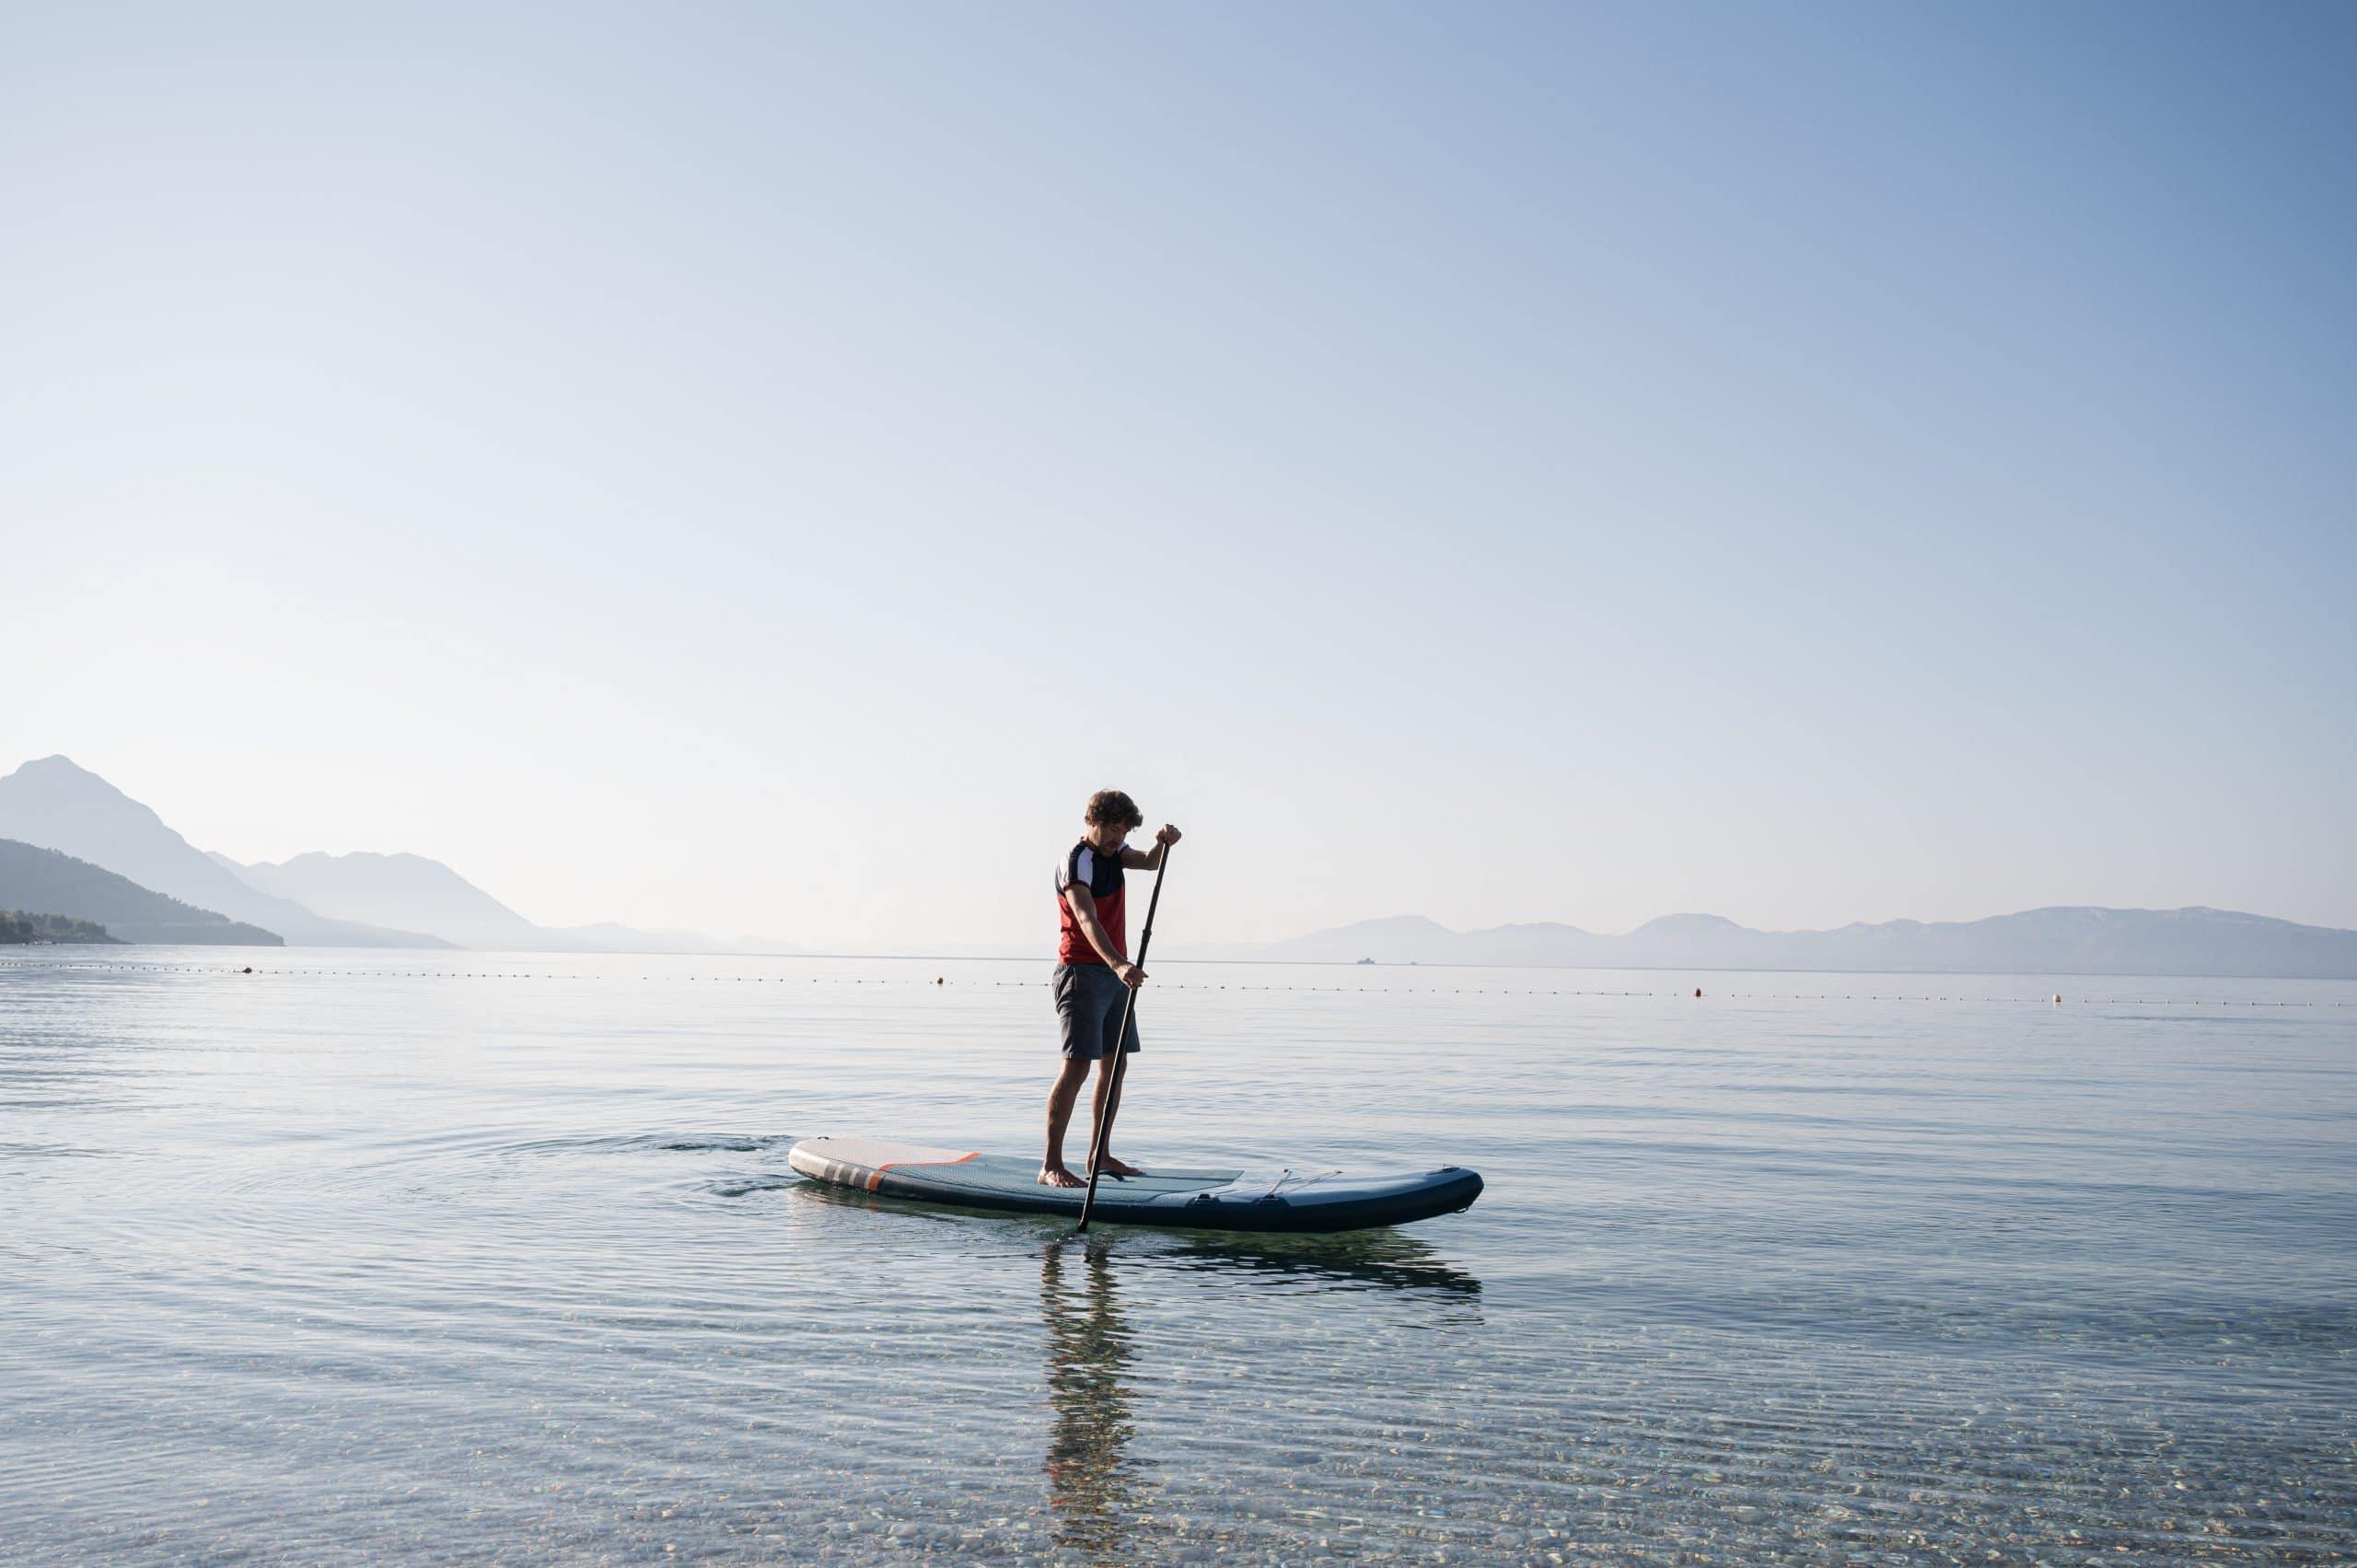 SUP (Stand up Paddleboard) Fishing, Best Alternative to Boats?